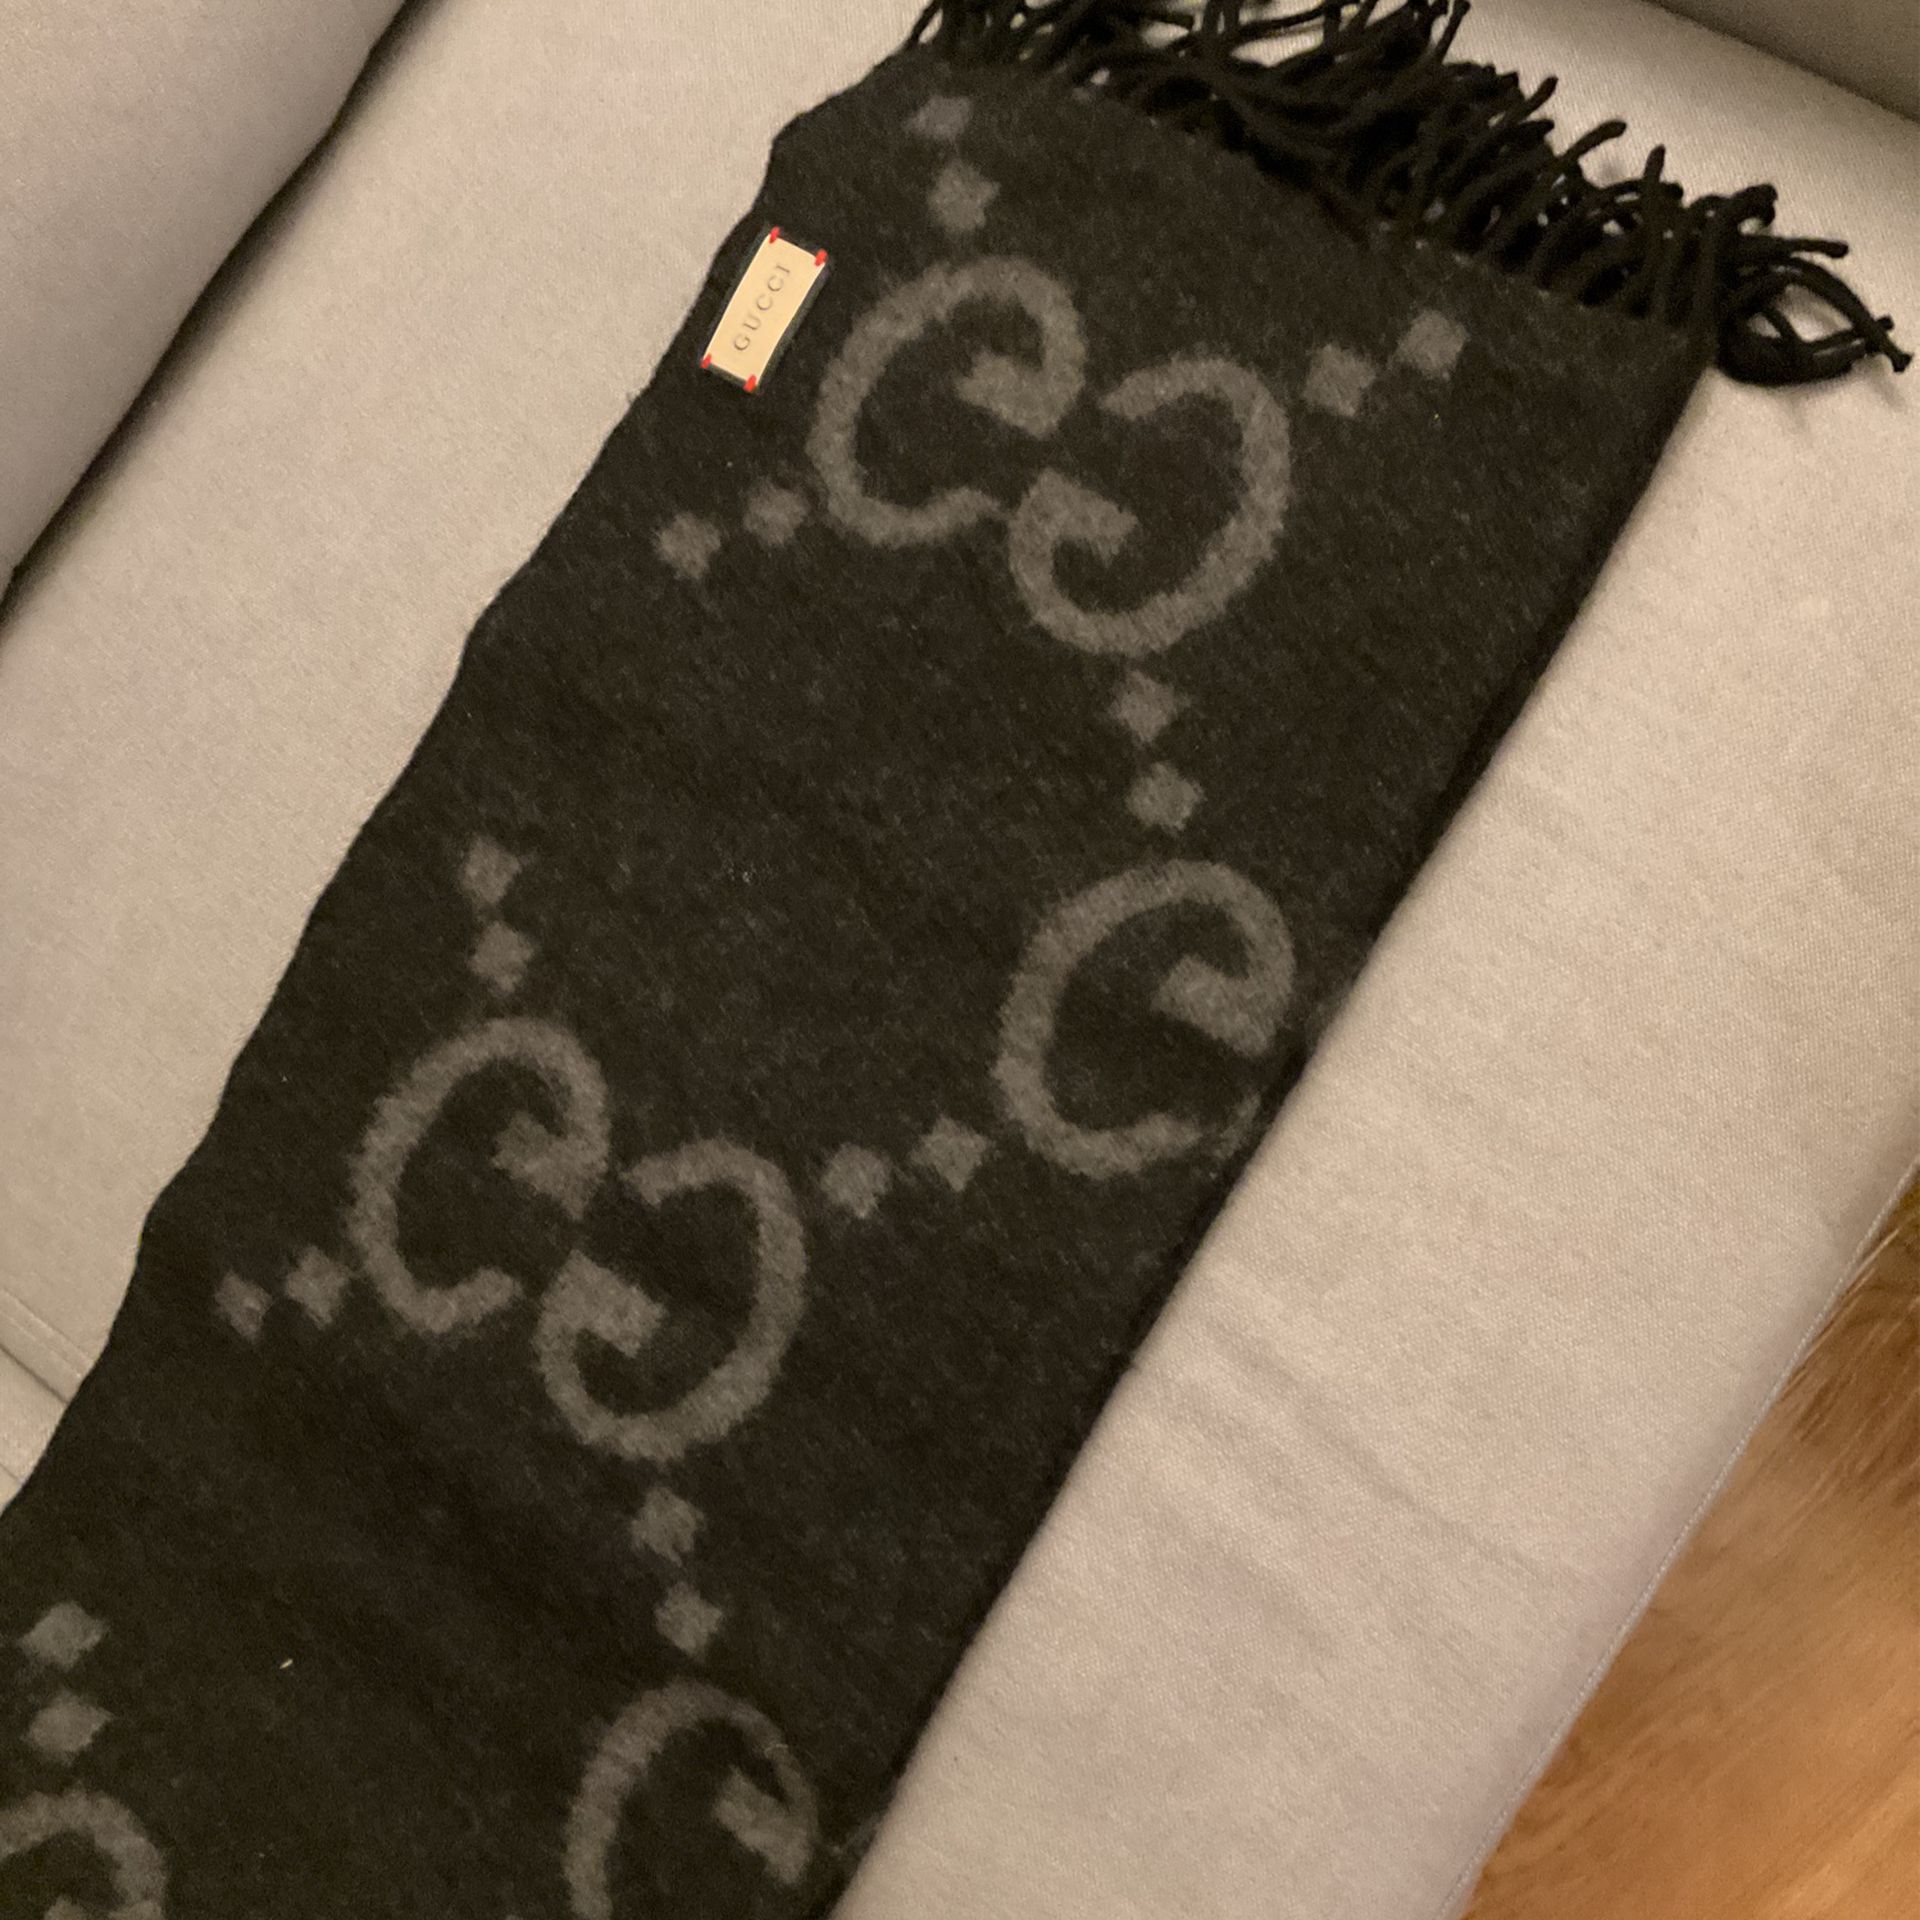 Authentic Gucci Scarf